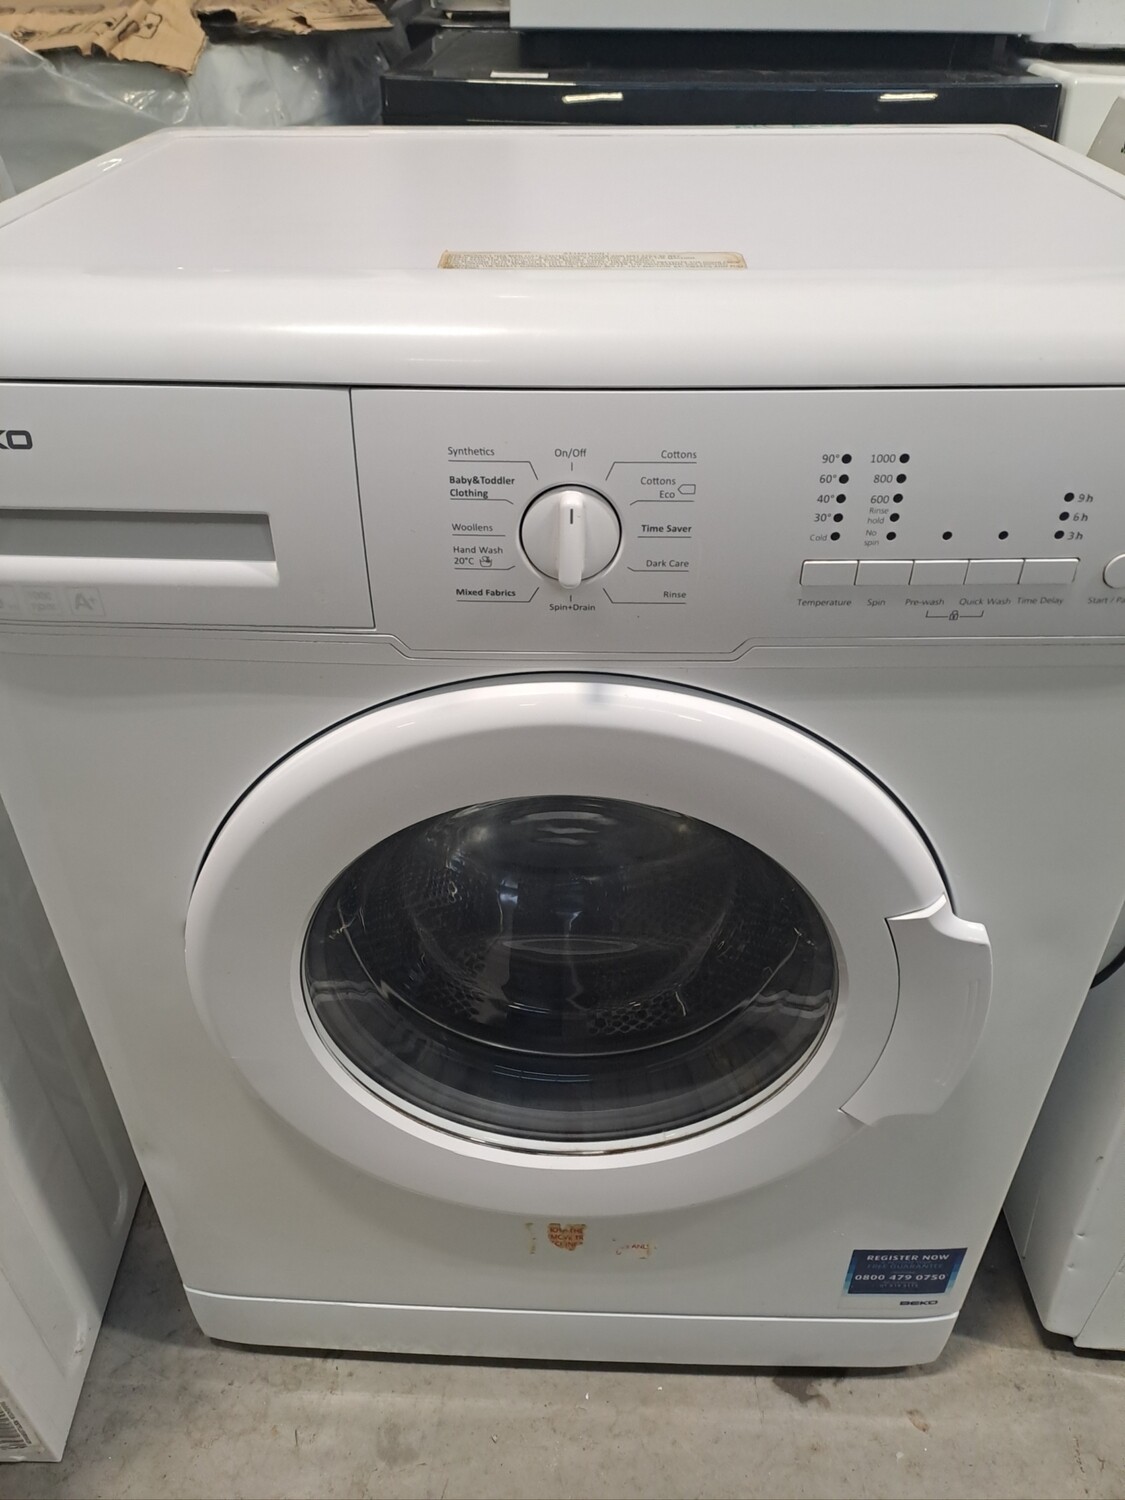 Beko WM5102W 5kg Load 1000 Spin Washing Machine - White - Refurbished - 6 Month Guarantee. This item is located in our Whitby Road Shop 